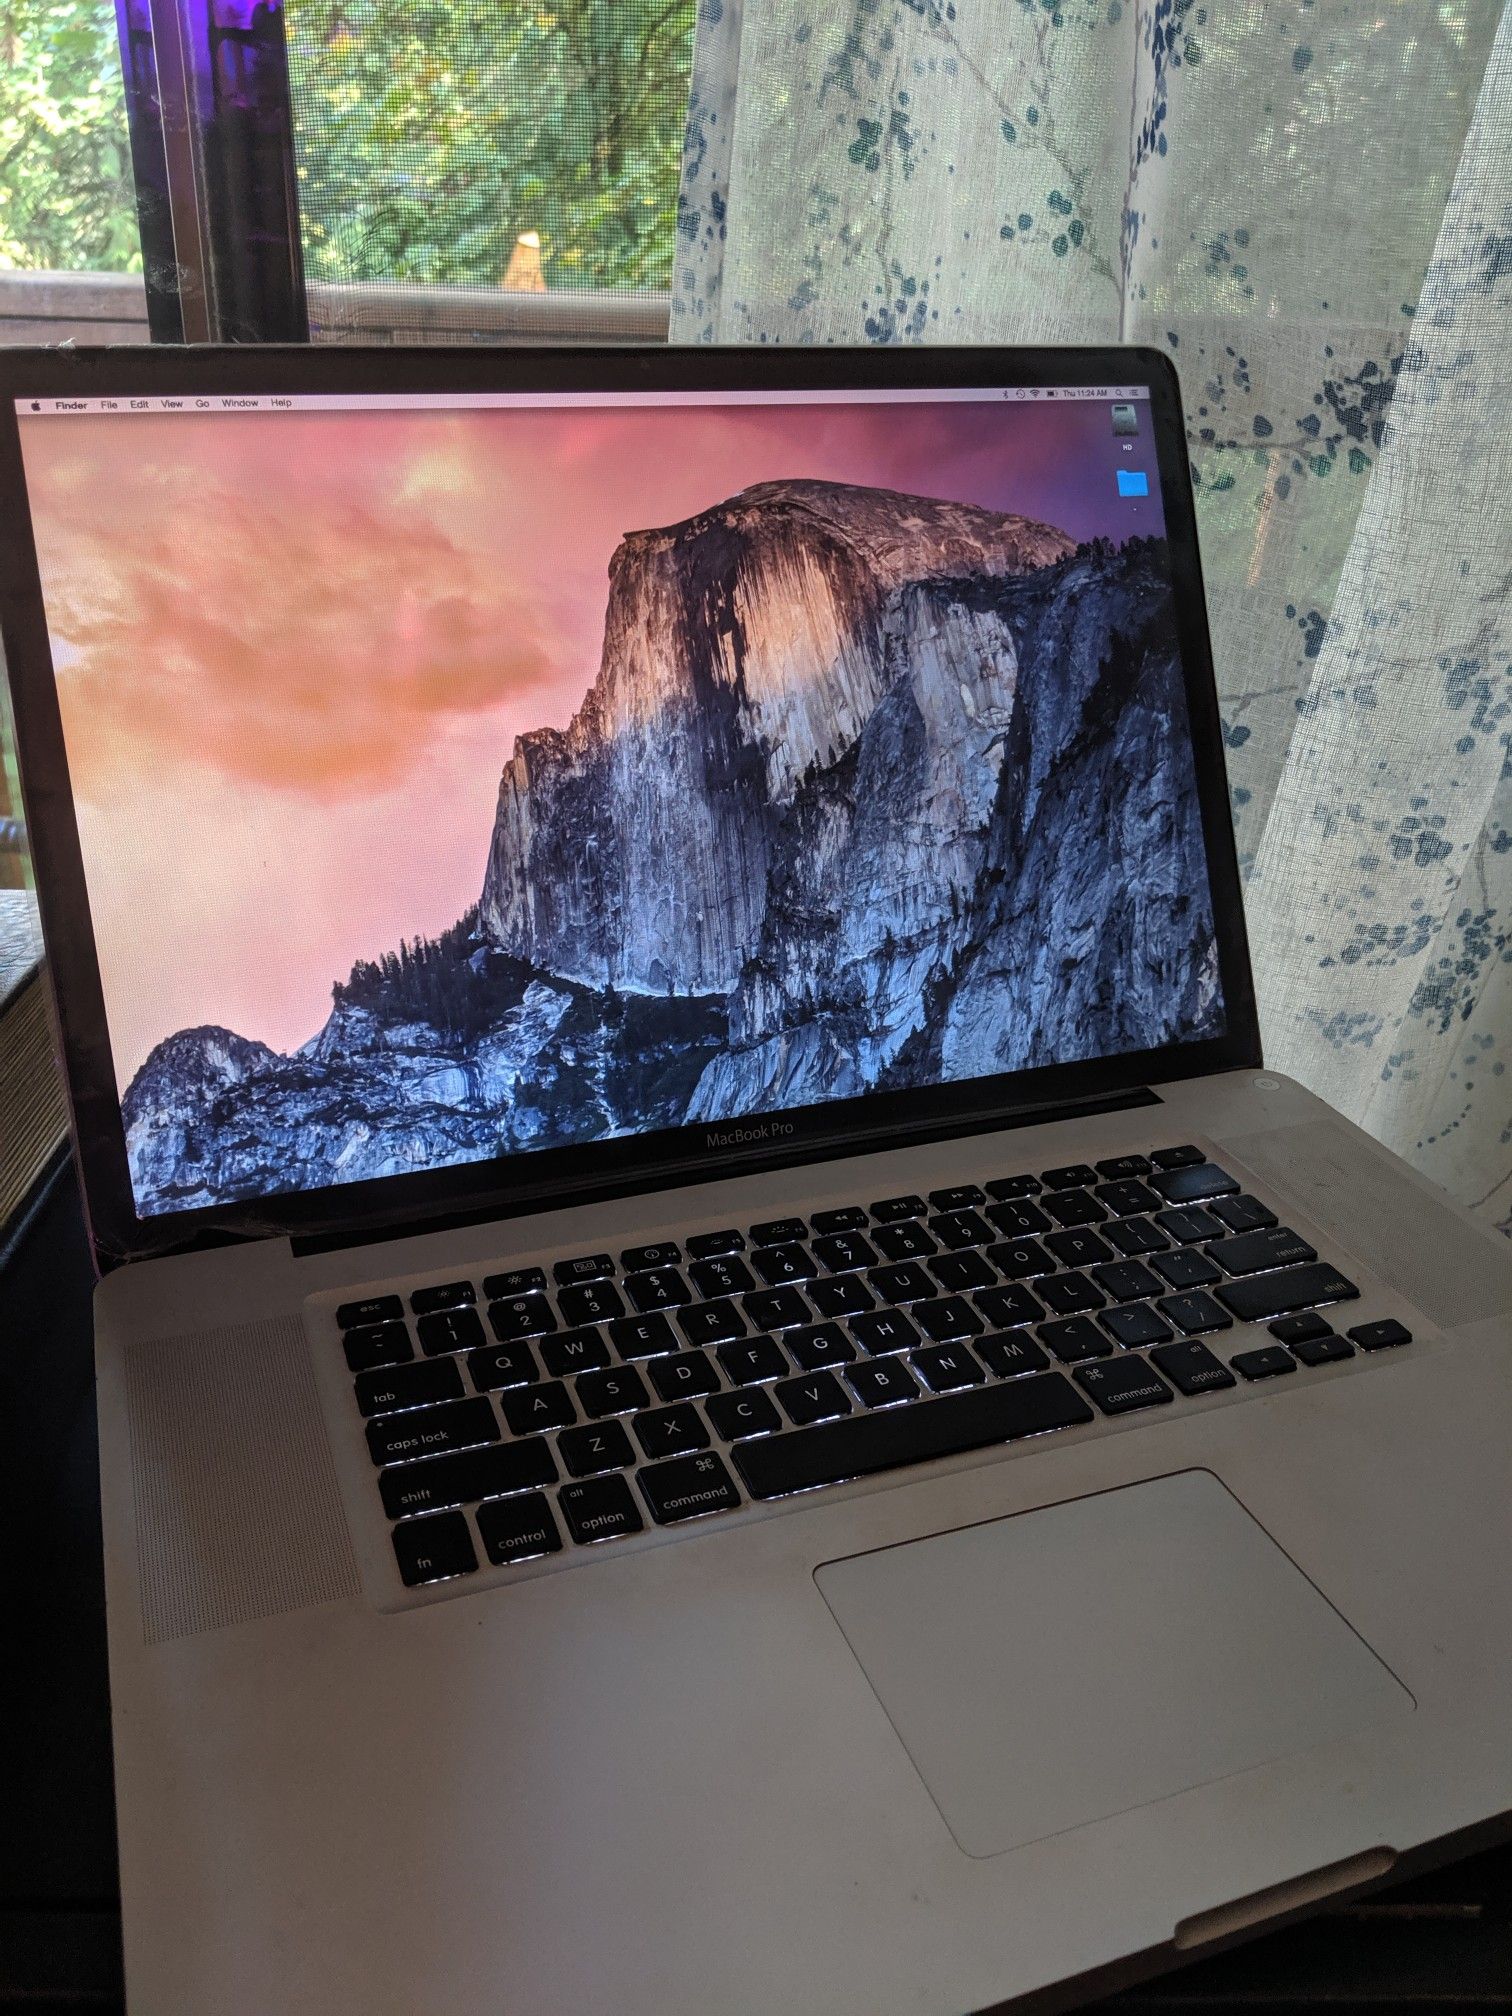 Macbook Pro 17" $500 includes wireless mouse & travel bag